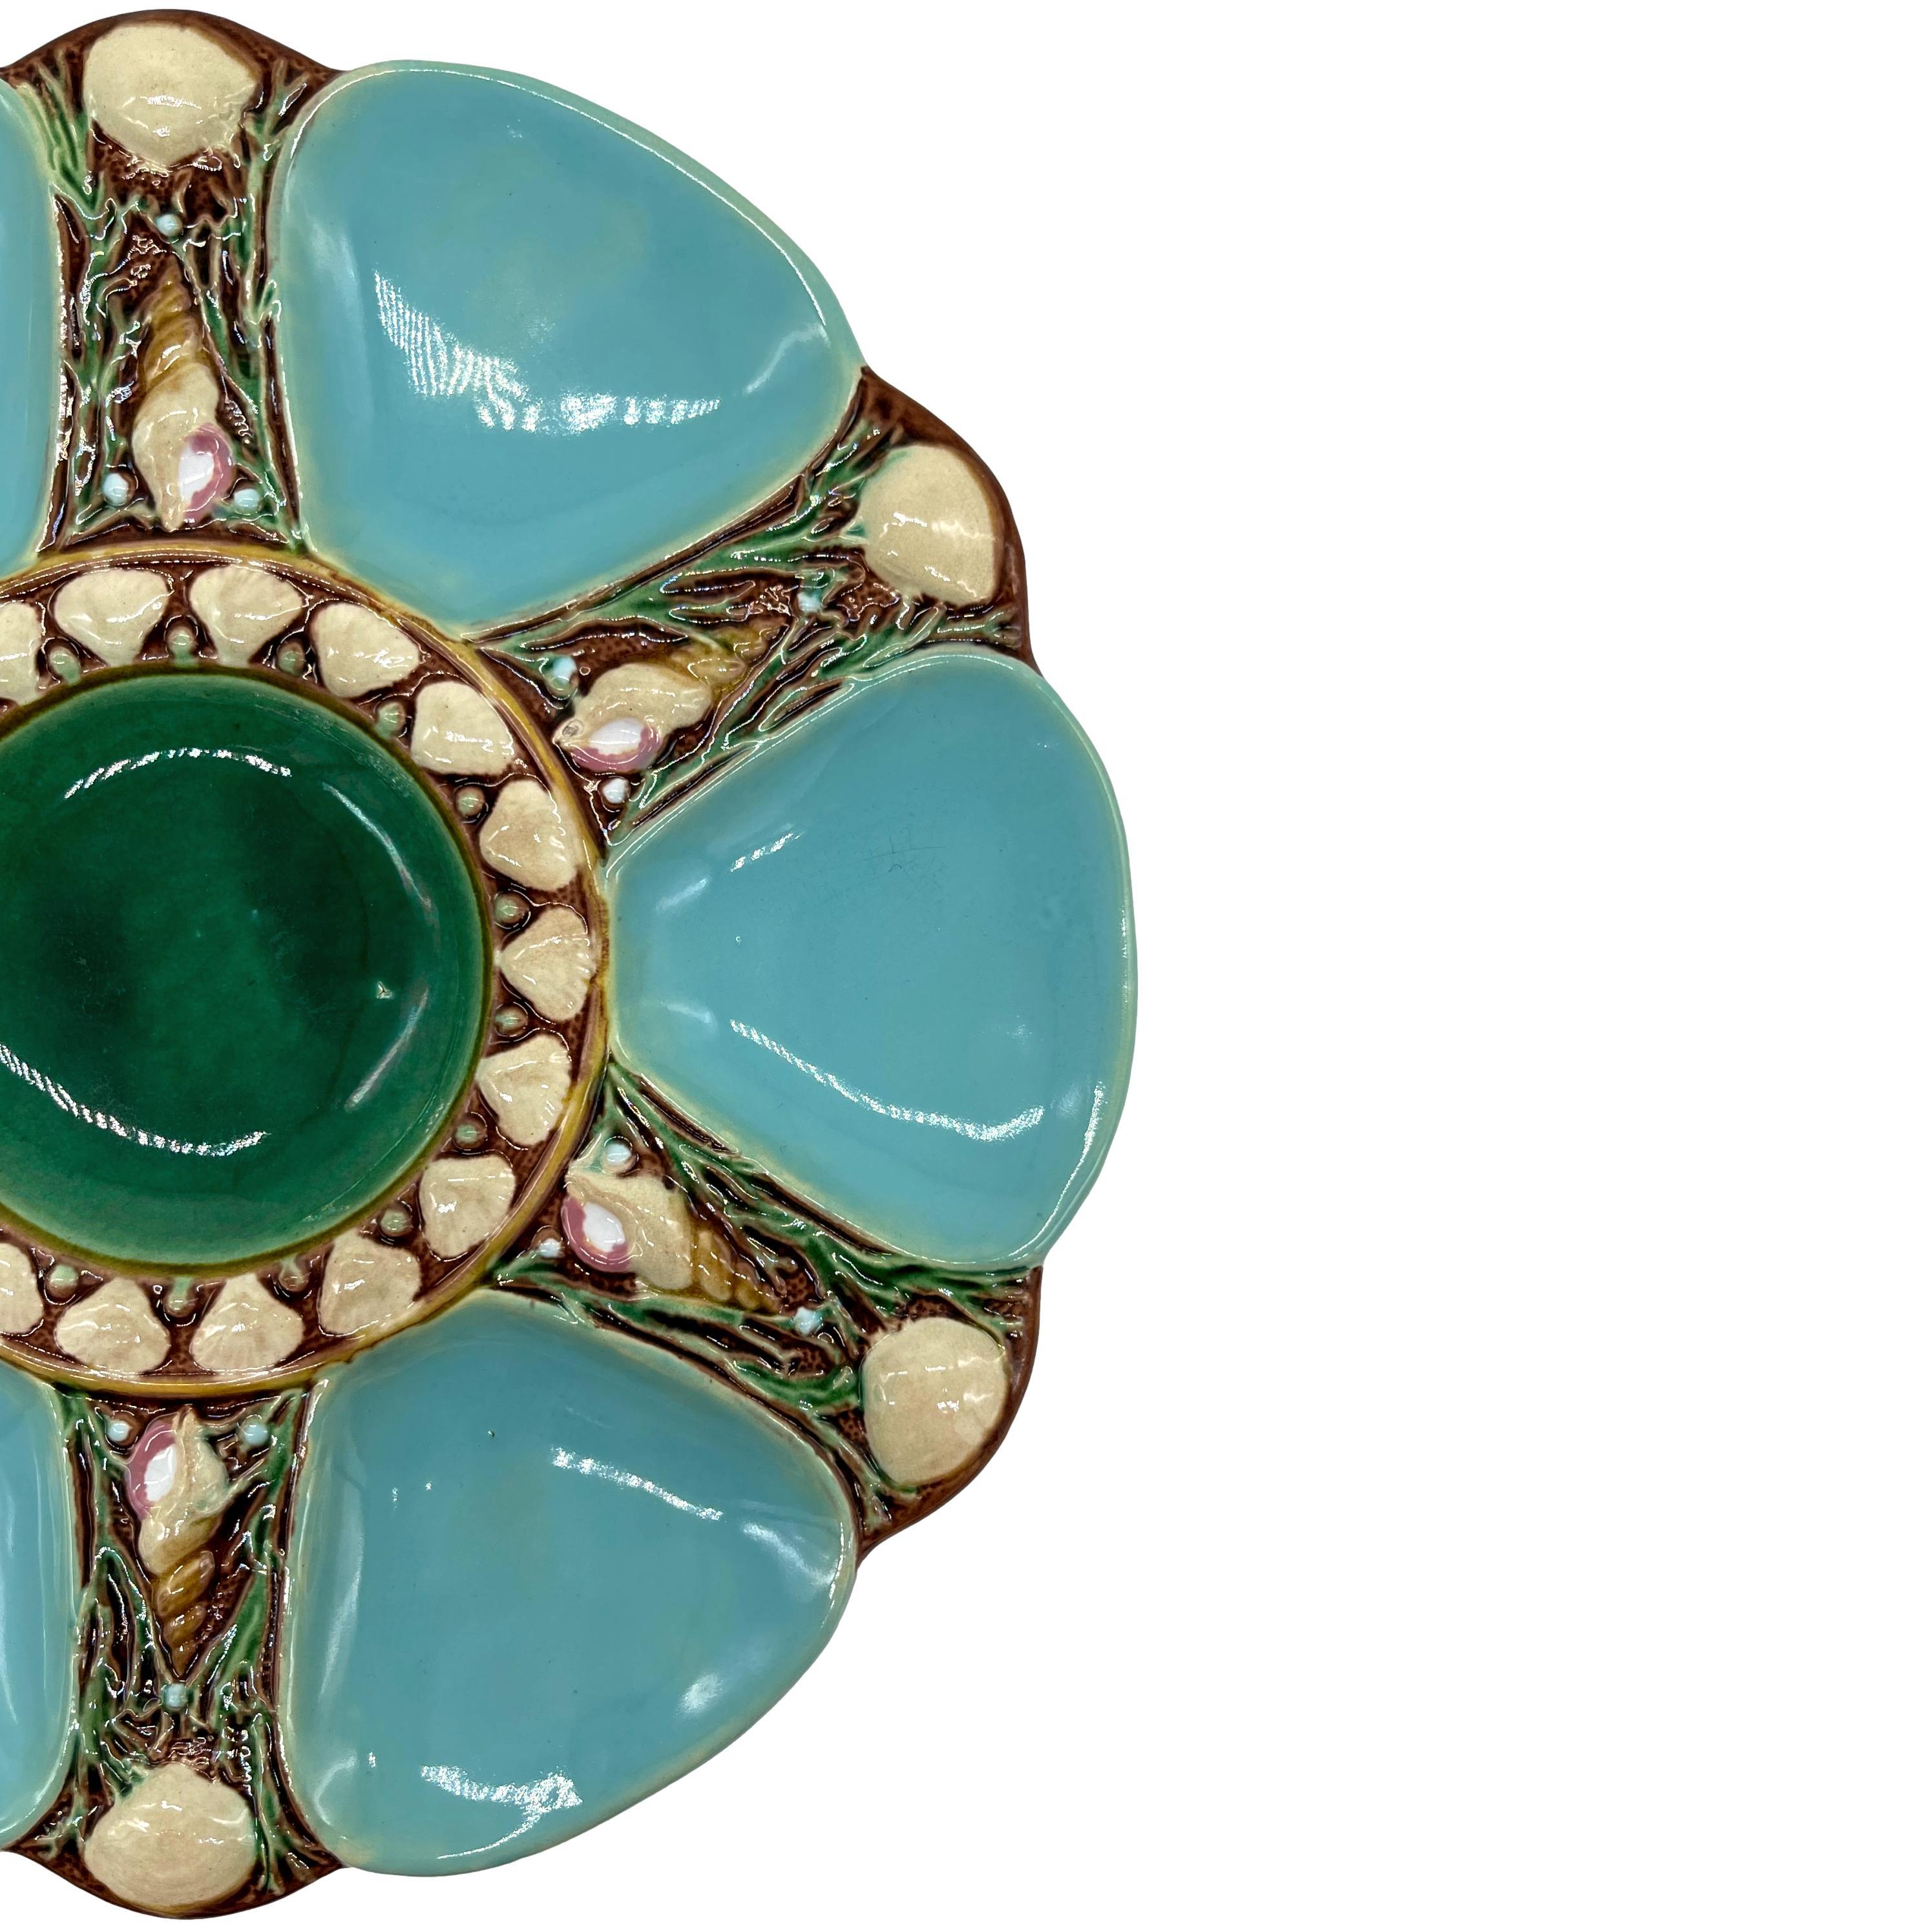 Victorian Minton Majolica Turquoise-Ground Oyster Plate, Shells and Seaweed, Dated 1873